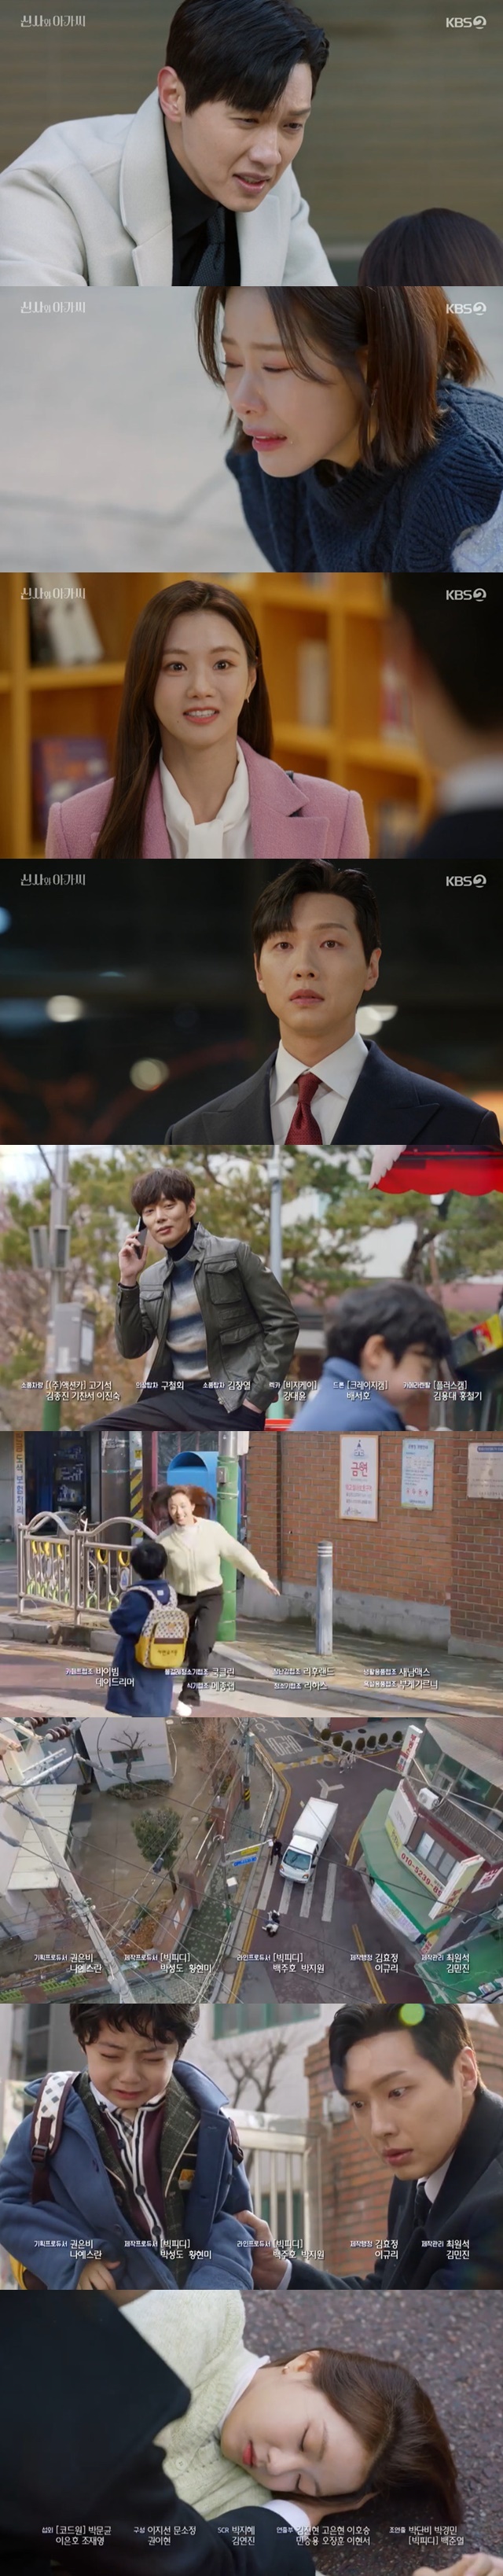 As soon as I found the memory of Ji Hyun Woo, Lee Se-hees traffic accident was predicted and viewer complaints poured out.In the 47th KBS 2TV weekend drama Shinto and Young Lady (played by Kim Sa-kyung/directed by Shin Chang-seok) broadcast on March 12, Lee Young-guk (played by Ji Hyun Woo) did not find all the memories but did not find the beats (Lee Se-hee) and The Slap.Lee Yeong-guk threw Cho Sa-ra (Park Ha-na) out, looking for all memory.Lee Young-guk knew the red lie of Cho Sa-ra, who claimed to have my child, and Jo Sa-ra confessed that he was not the presidents child, but committed suicide when Lee Young-guk found Memory.Lee Young-guk kicked out Josara, saying, Crazy woman, and Wang Dae-ran (Cha Hwa-yeon) slapped Josara and sprayed king salt.Lee Young-guk ran to Baro Park Dandan, but turned away without being able to get in front of him.Lee Young-guk told Lee Jae-ni (Choi Myung-bin) and Lee Se-chan (Yoo Jun-seo) that Father Memory is back.Father lied fatally about not being able to remember, but that wouldnt bring him back.Because Father and the teacher have already broken up.Lee Jae-ni said, Father must meet someone who will be my mother. She is only 13 years old.I think Father should meet someone who is now careful to meet my mother. Lee said, What is the importance of age in love?My sister wants Father to give up love because of us. He continued to hope that his father, Lee Young-guk and Park Dan-dan, met.When Park happened to say, Dont worry about me, Im doing really well. I thought it would be really hard to break up with the chairman, but there is something better than I thought.I have so many friends, study and do things for a long time that I am not able to do 24 hours. I am fine, so you should be good. Park secretly peeked at Lee Young-guk and cried, Im not okay. I missed you.Park Soo-chul (Lee Jong-won) kept all the secrets of Lee Young-guks visit to Memory because she was afraid her daughter Park Dan-dan would meet Lee Young-guk again, but Park Dan-dan made a strange impression when she saw Lee Young-guk saying, Its been a long time.In the meantime, he was threatened by his son Sejong (Seo Woo-jin)s father, Jin Sang-gu (Jeon Seung-bin).Jin Sang-gu asked for money after learning that his biological son Sejong had become a foster son of Lee Yeong-guk.Josara gave 300 million won to all property, but Jin Sang-gu was crazy about gambling and demanded one billion more. Eventually, he went to Lee Young-guk at the end of the broadcast and said, Hello, Chairman.Father, he said.In the trailer, Josara confessed to Lee Young-guk, I am Sejongs mother, and Jin Sang-gu was abducted by sejong and demanded money.